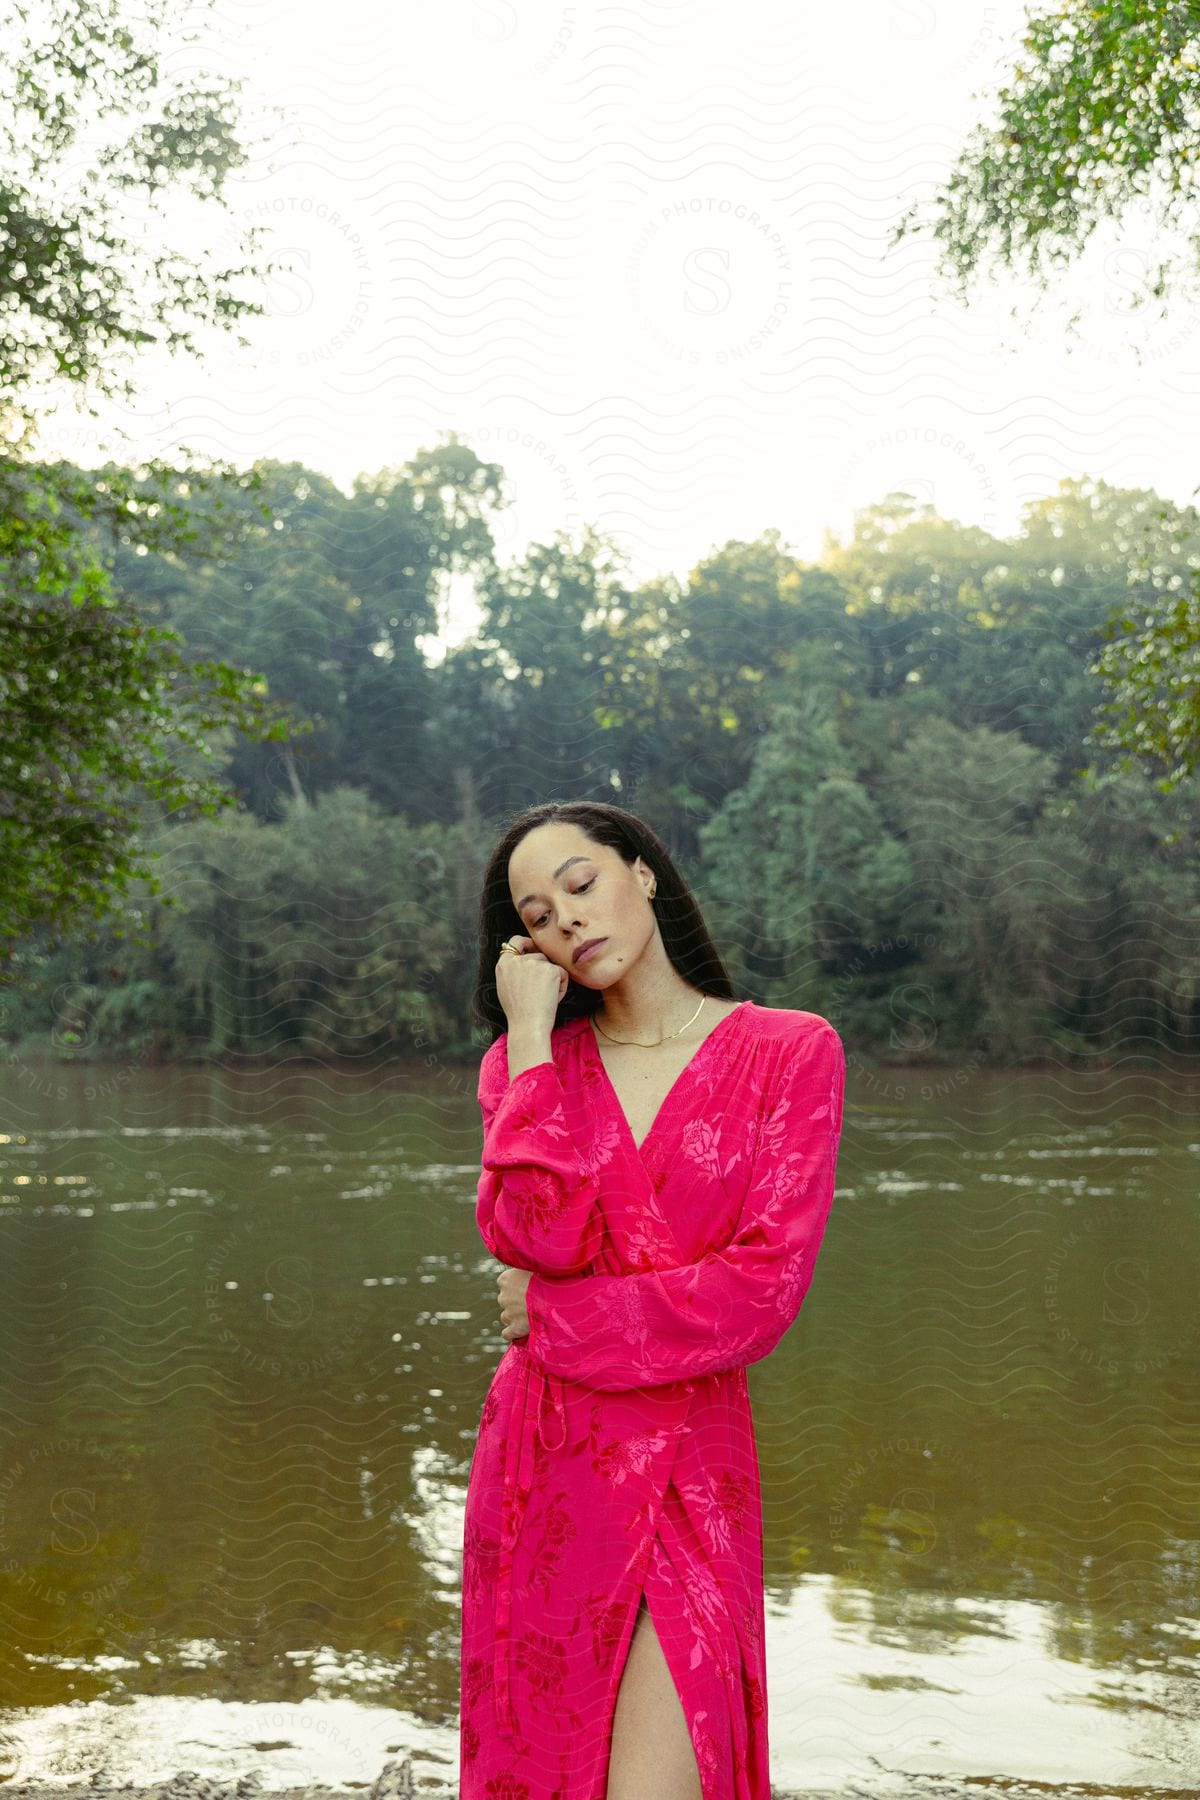 A woman modeling a robe out in nature.